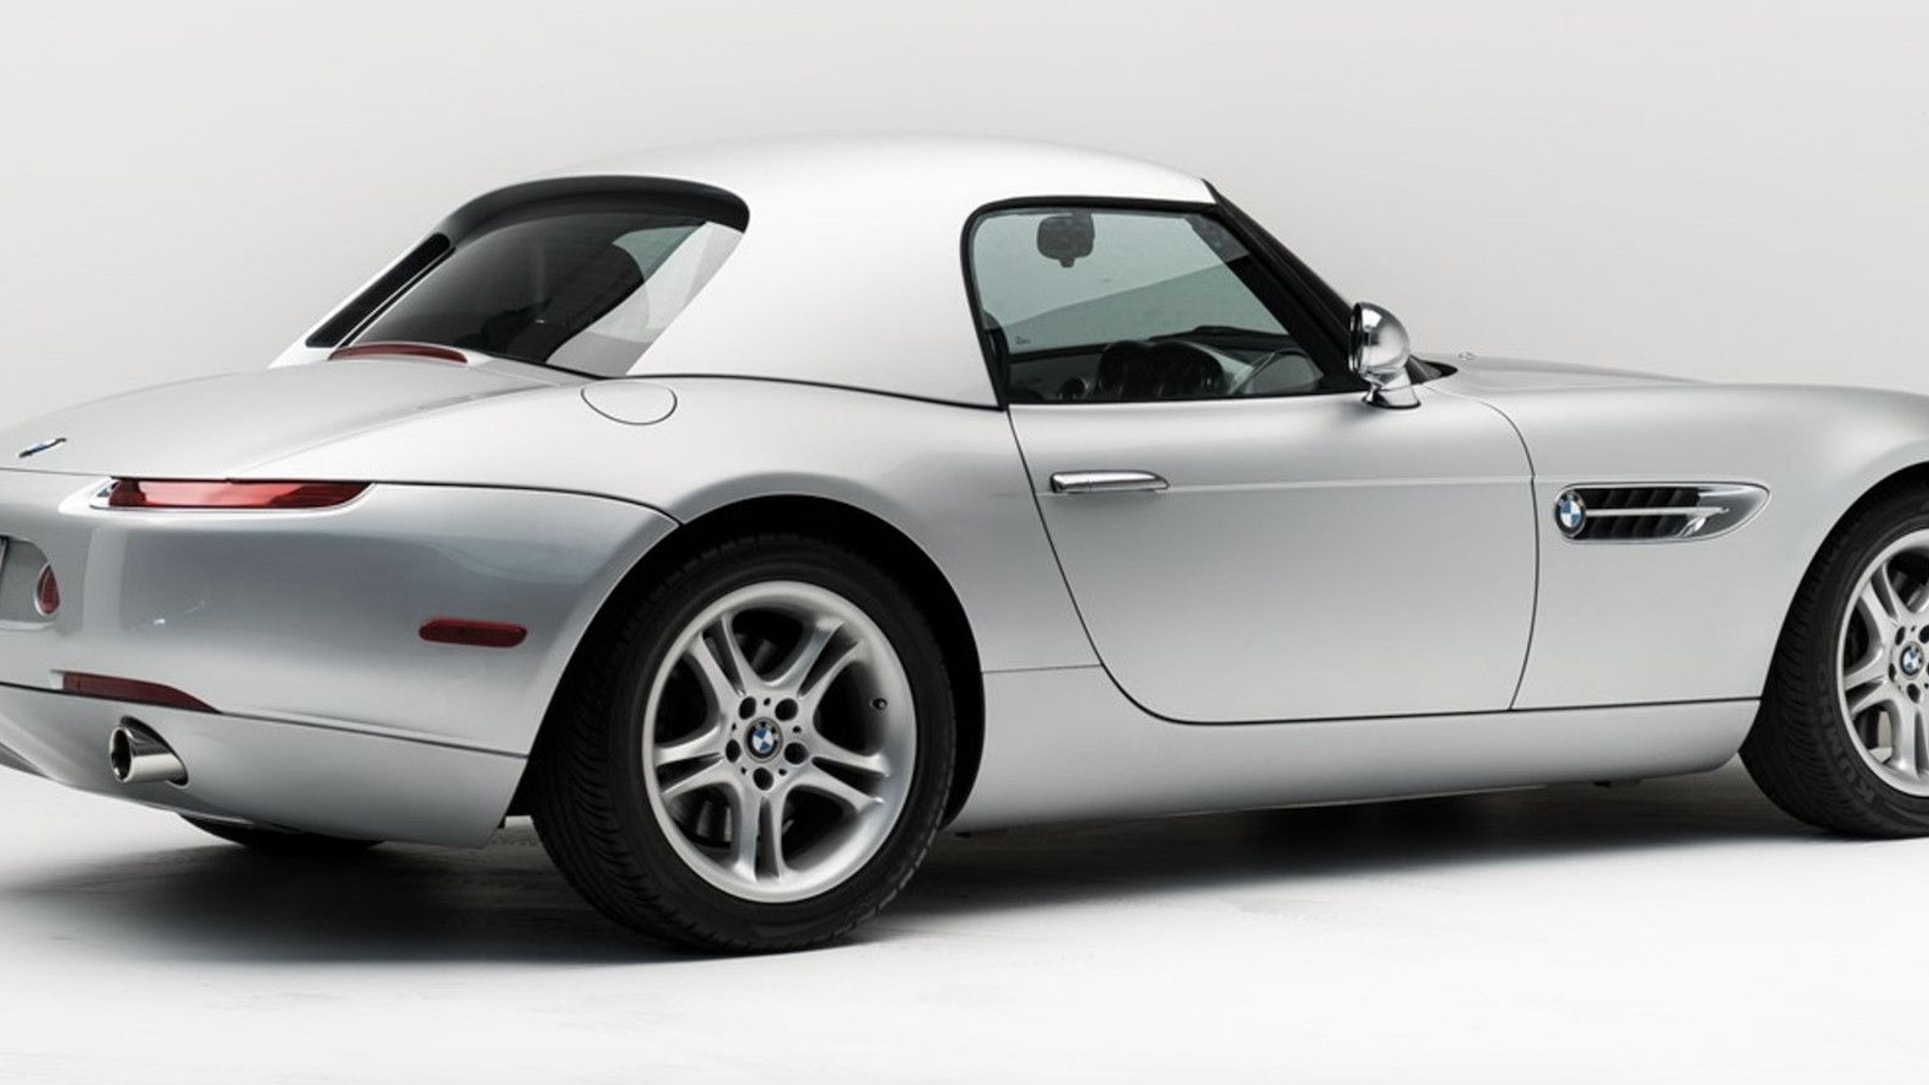 2000 BMW Z8 owned by Steve Jobs